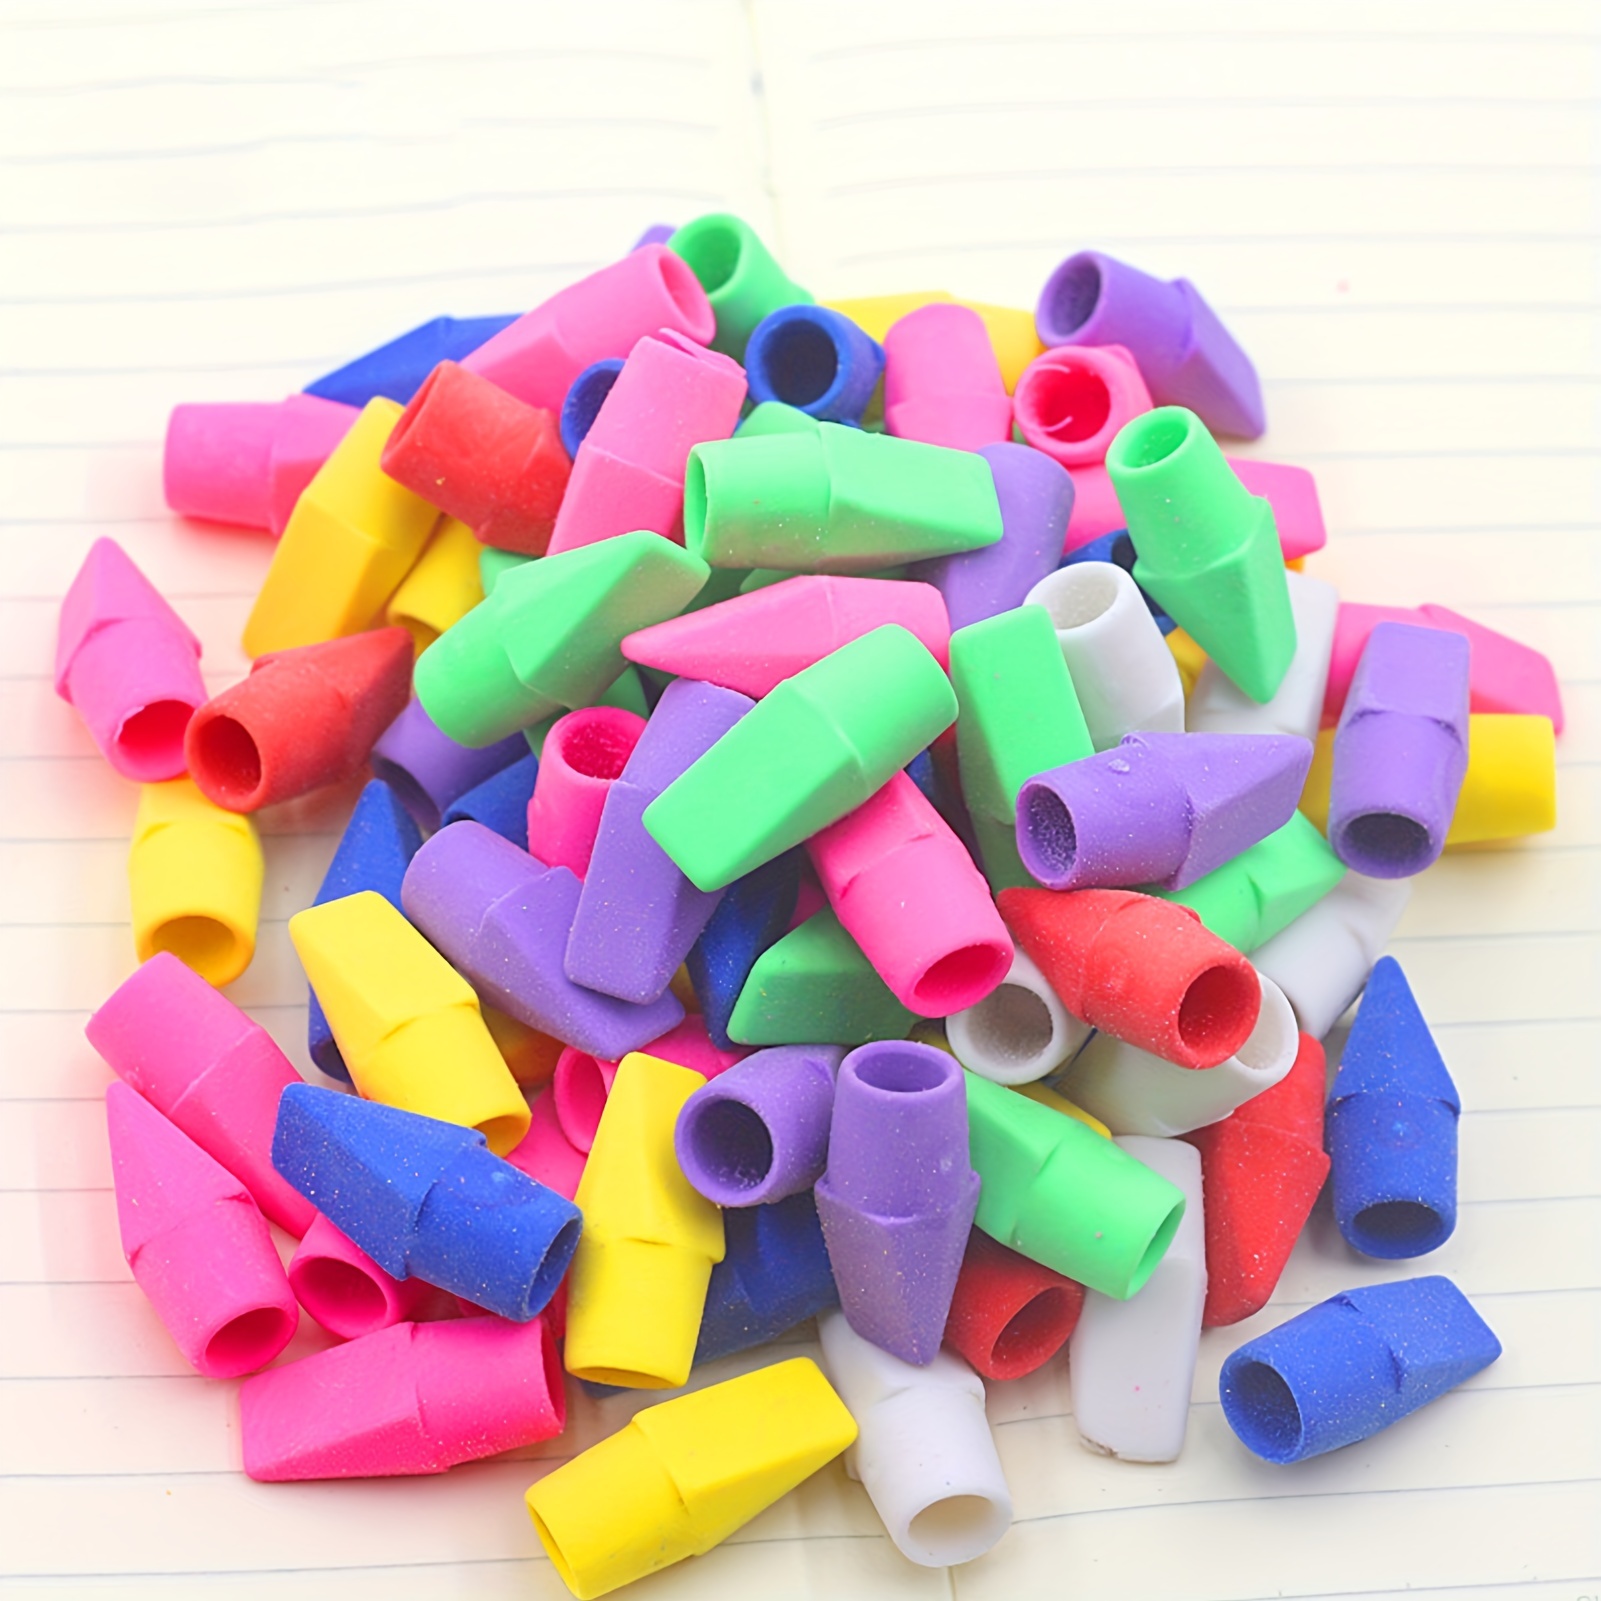 Pencil Top Erasers, Eraser Caps Assorted Colors Pencil Eraser Toppers for  Kids Student Writing Painting Correction Supplies(10pcs)